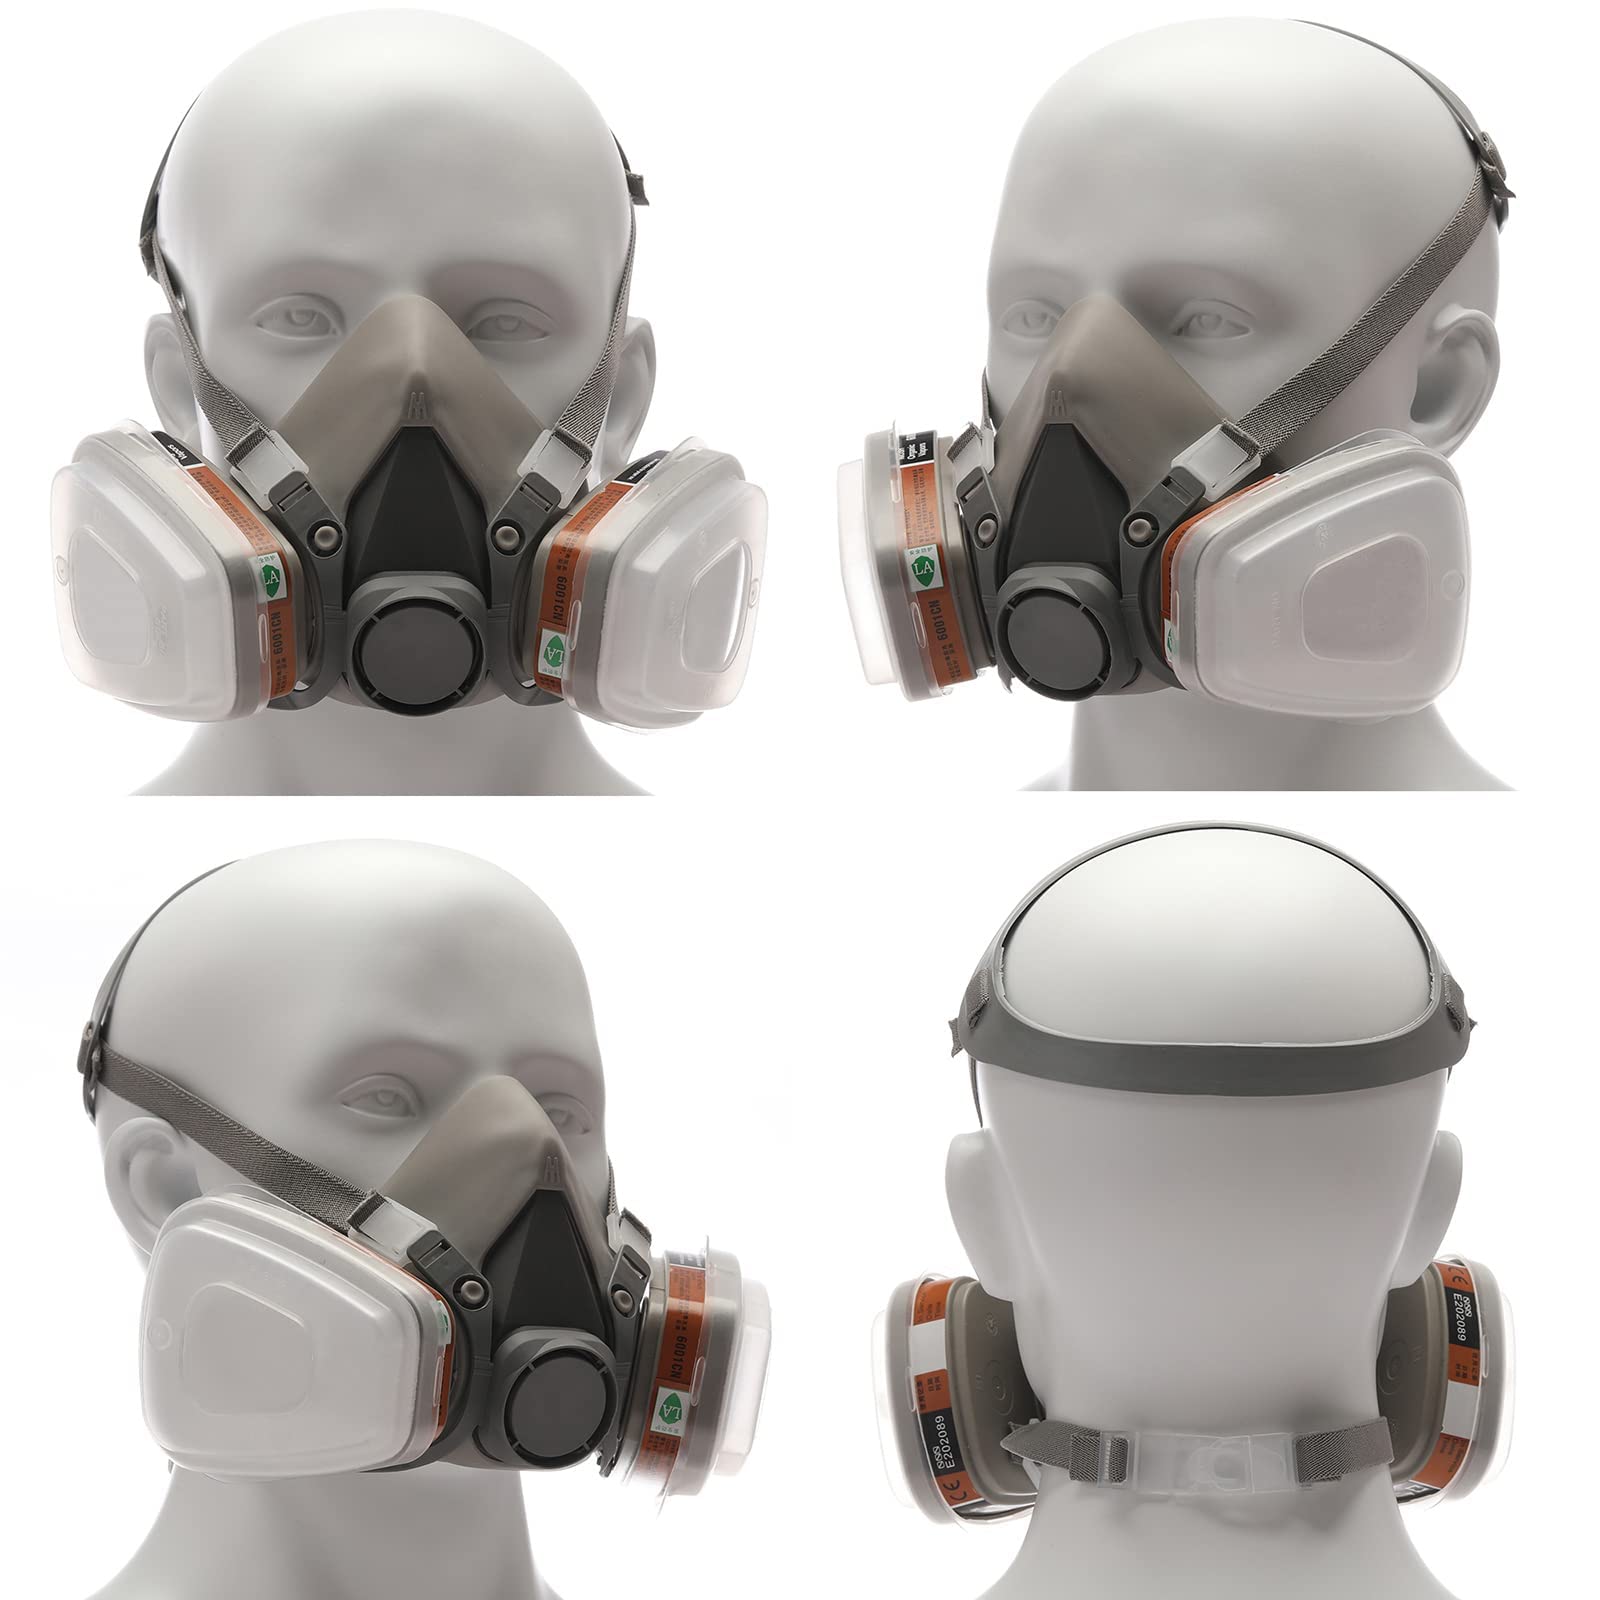 RANKSING Reusable Respirator Gas Mask Half Facepiece Shield 6200 Face Cover with Filters for Dust, Fumes, Asbestos, Chemicals and Other Airborne Particles while Painting, Spraying, Polishing and More